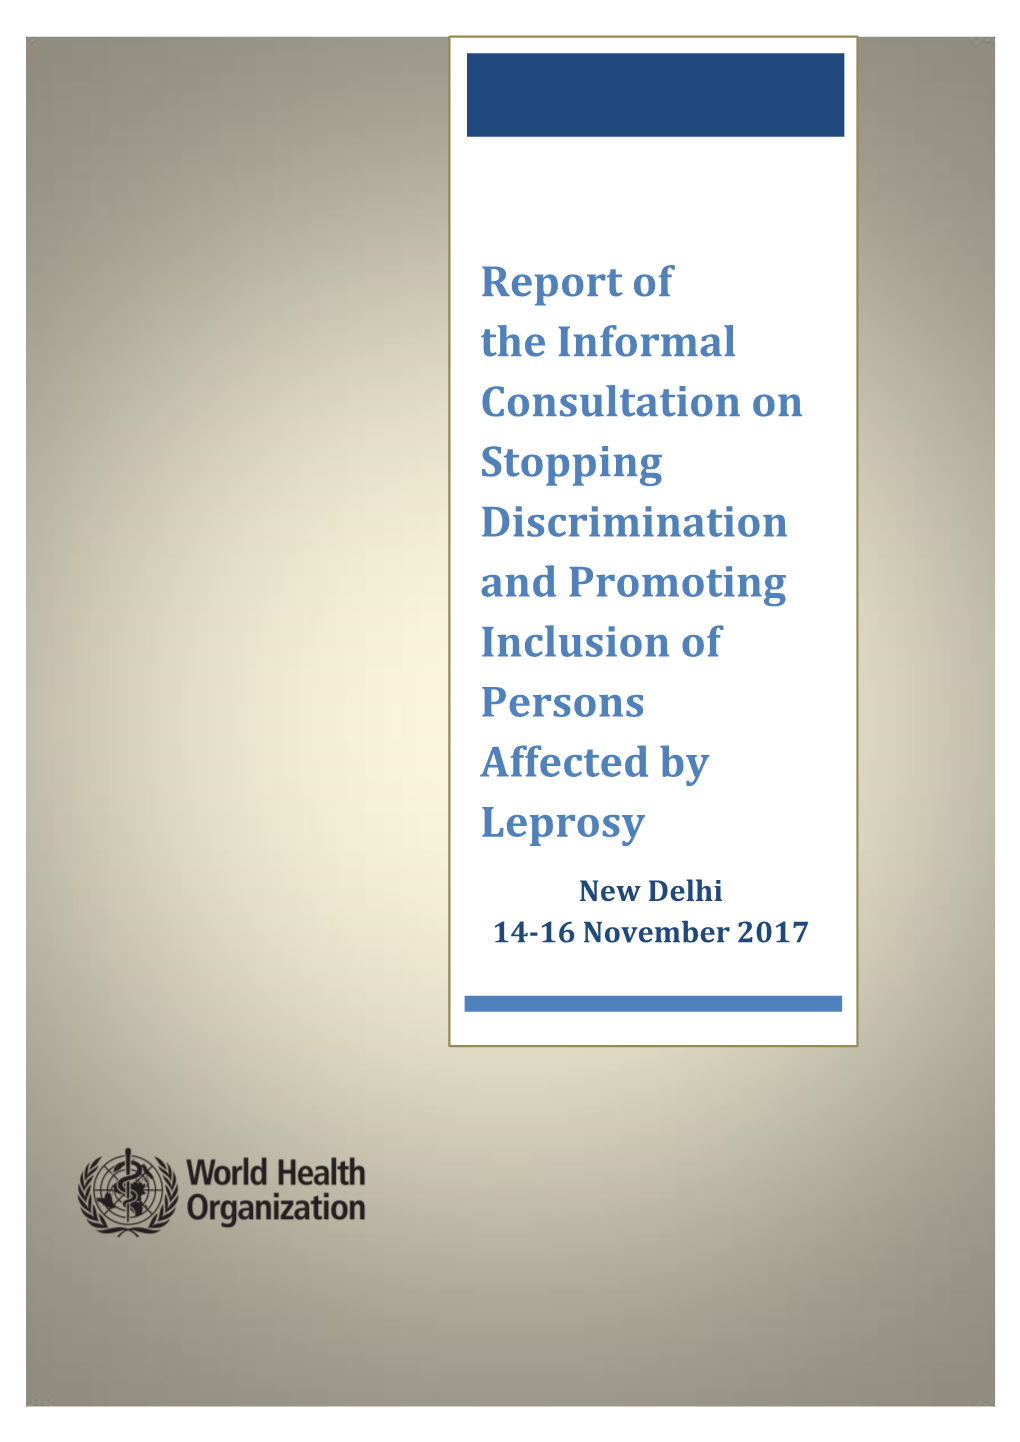 Report of the Informal Consultation on Stopping Discrimination and Promoting Inclusion of Persons Affected by Leprosy